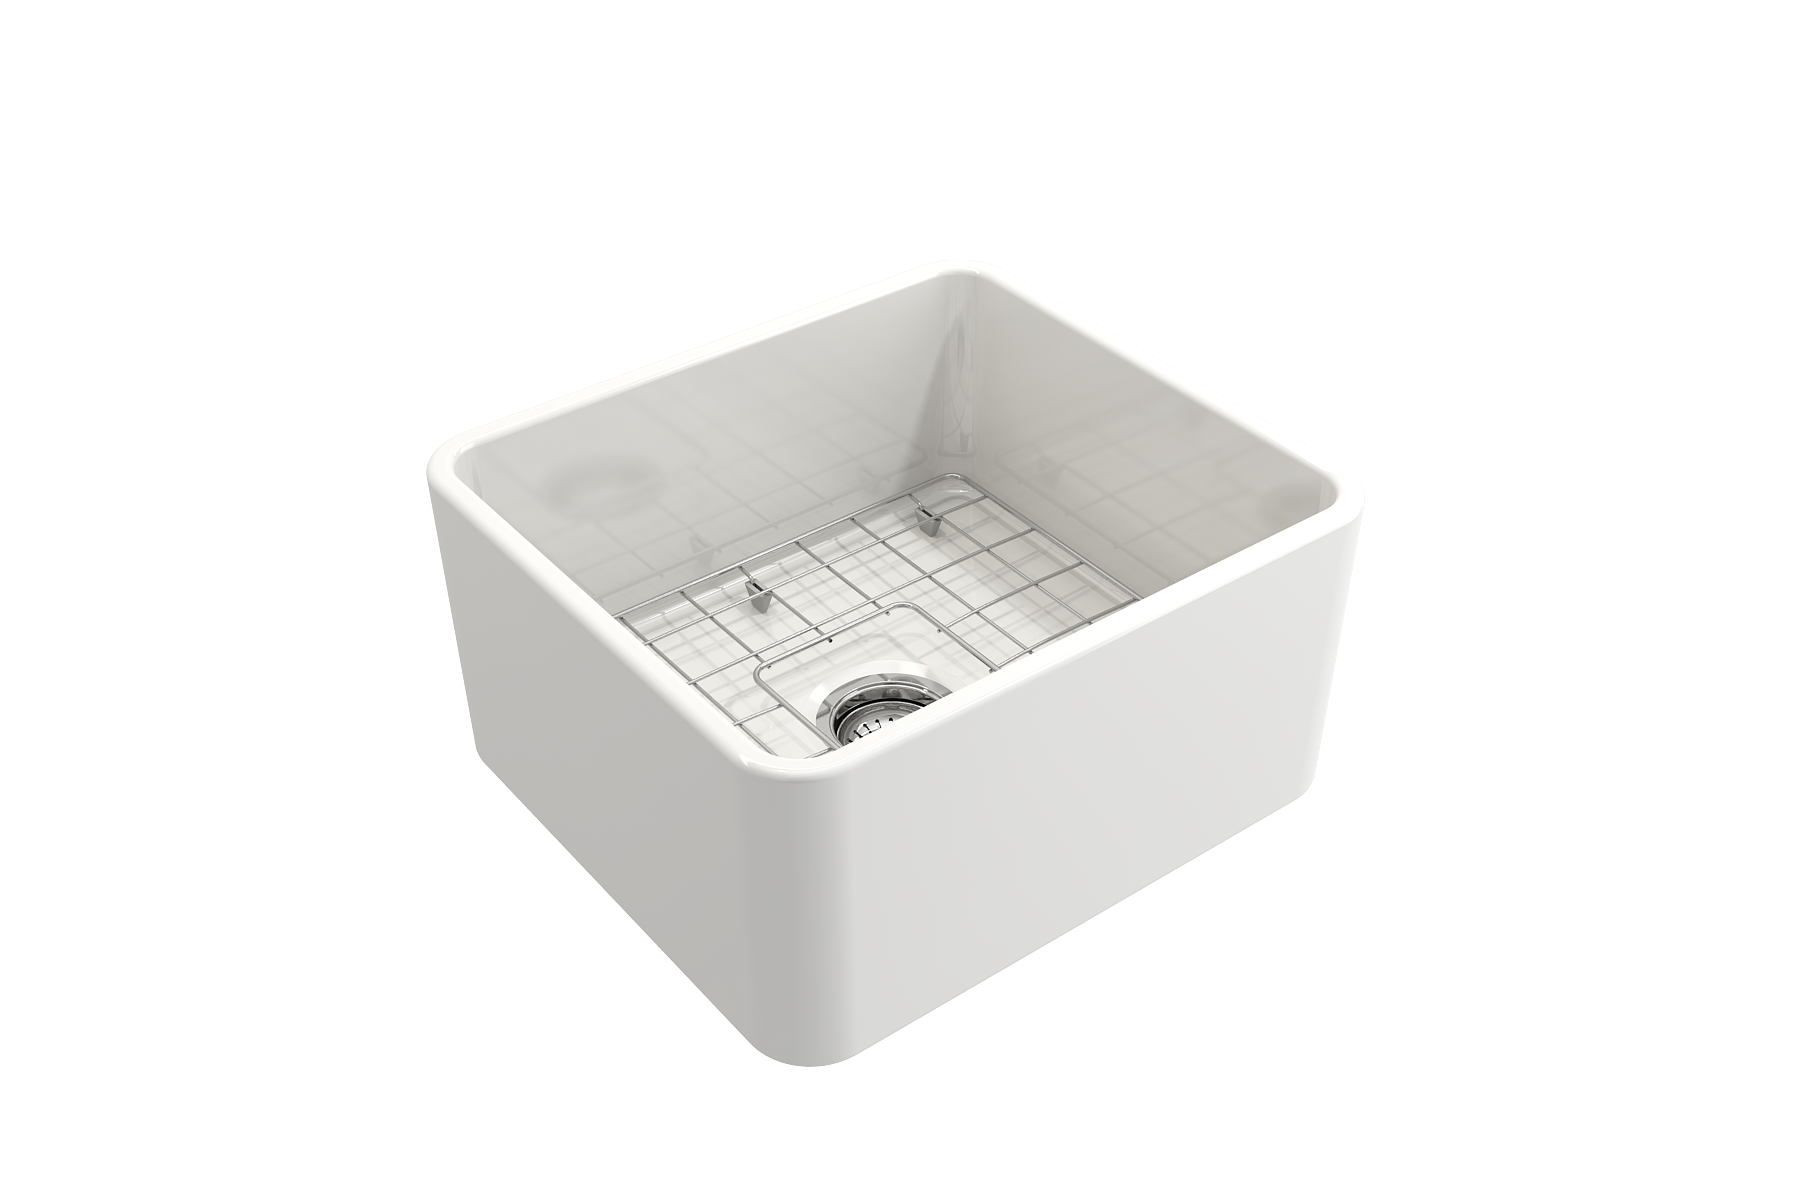 Bocchi Classico Farmhouse Apron Front Fireclay 20" Single Bowl Kitchen Sink with Protective Bottom Grid and Strainer, Available in 9 colors!